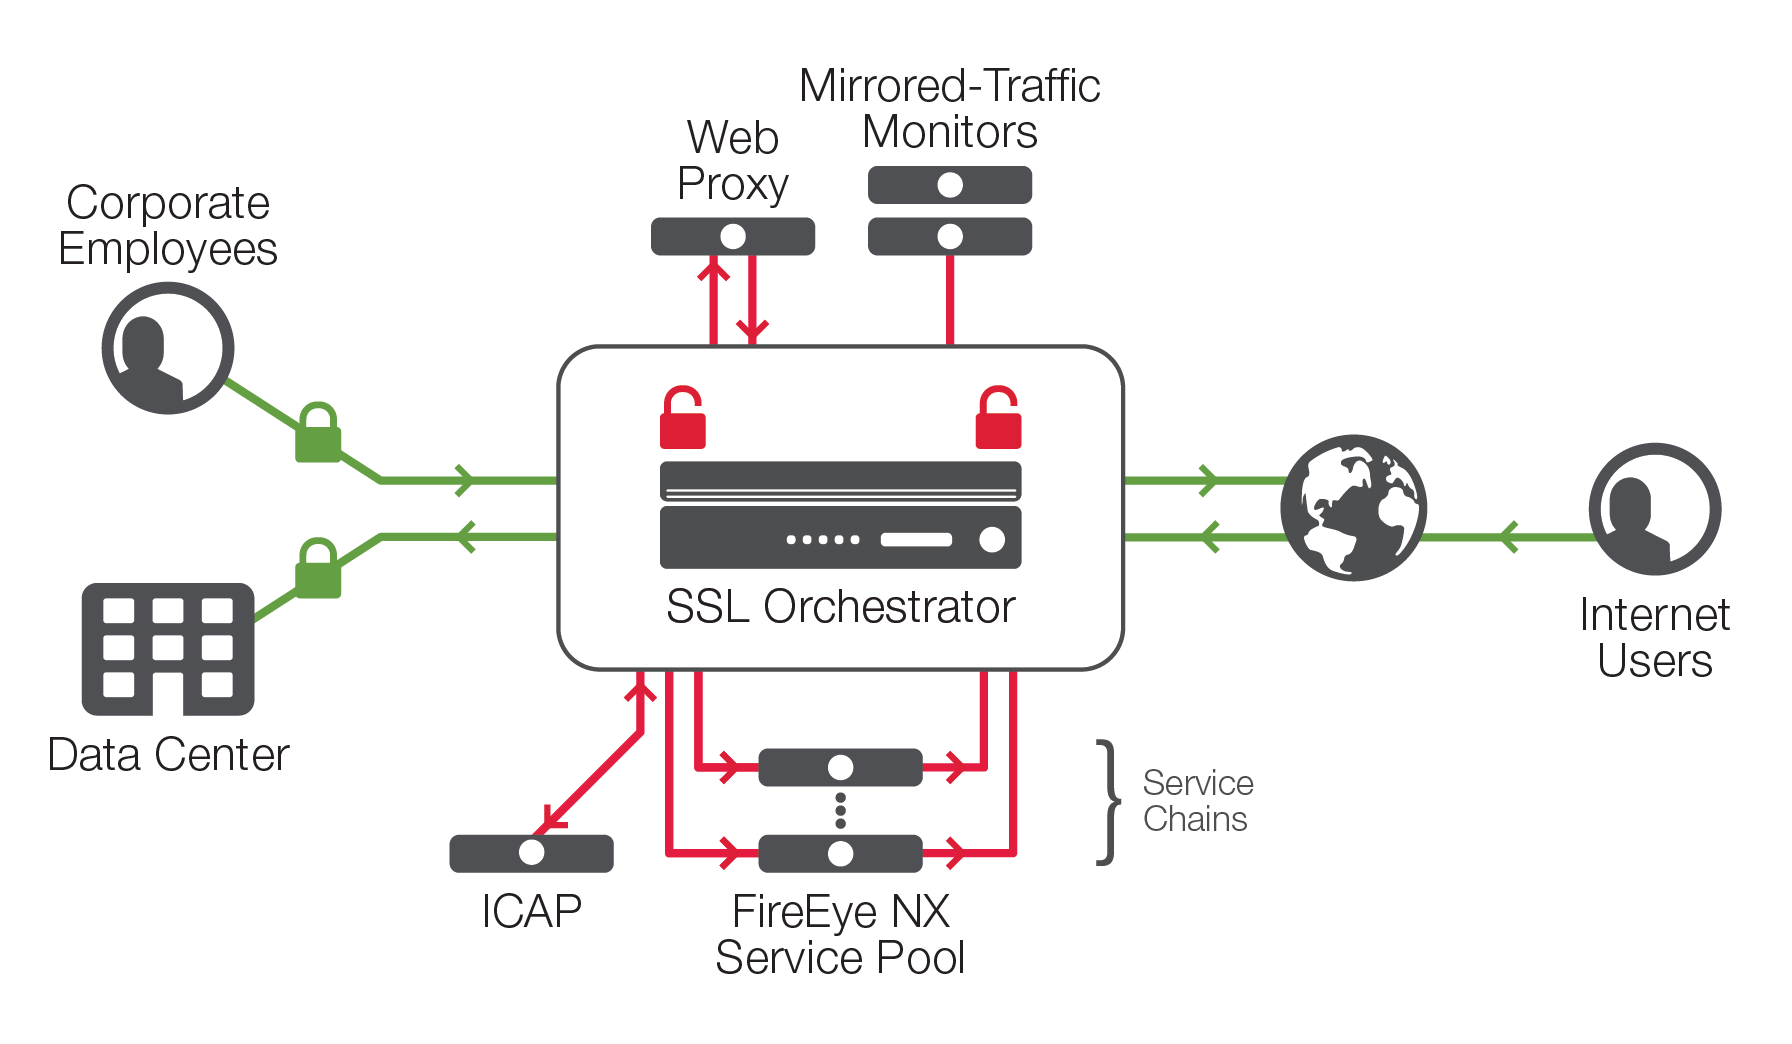 Diagram of the joint F5 SSL Orchestrator and FireEye solution, showing both inbound and outbound traffic.